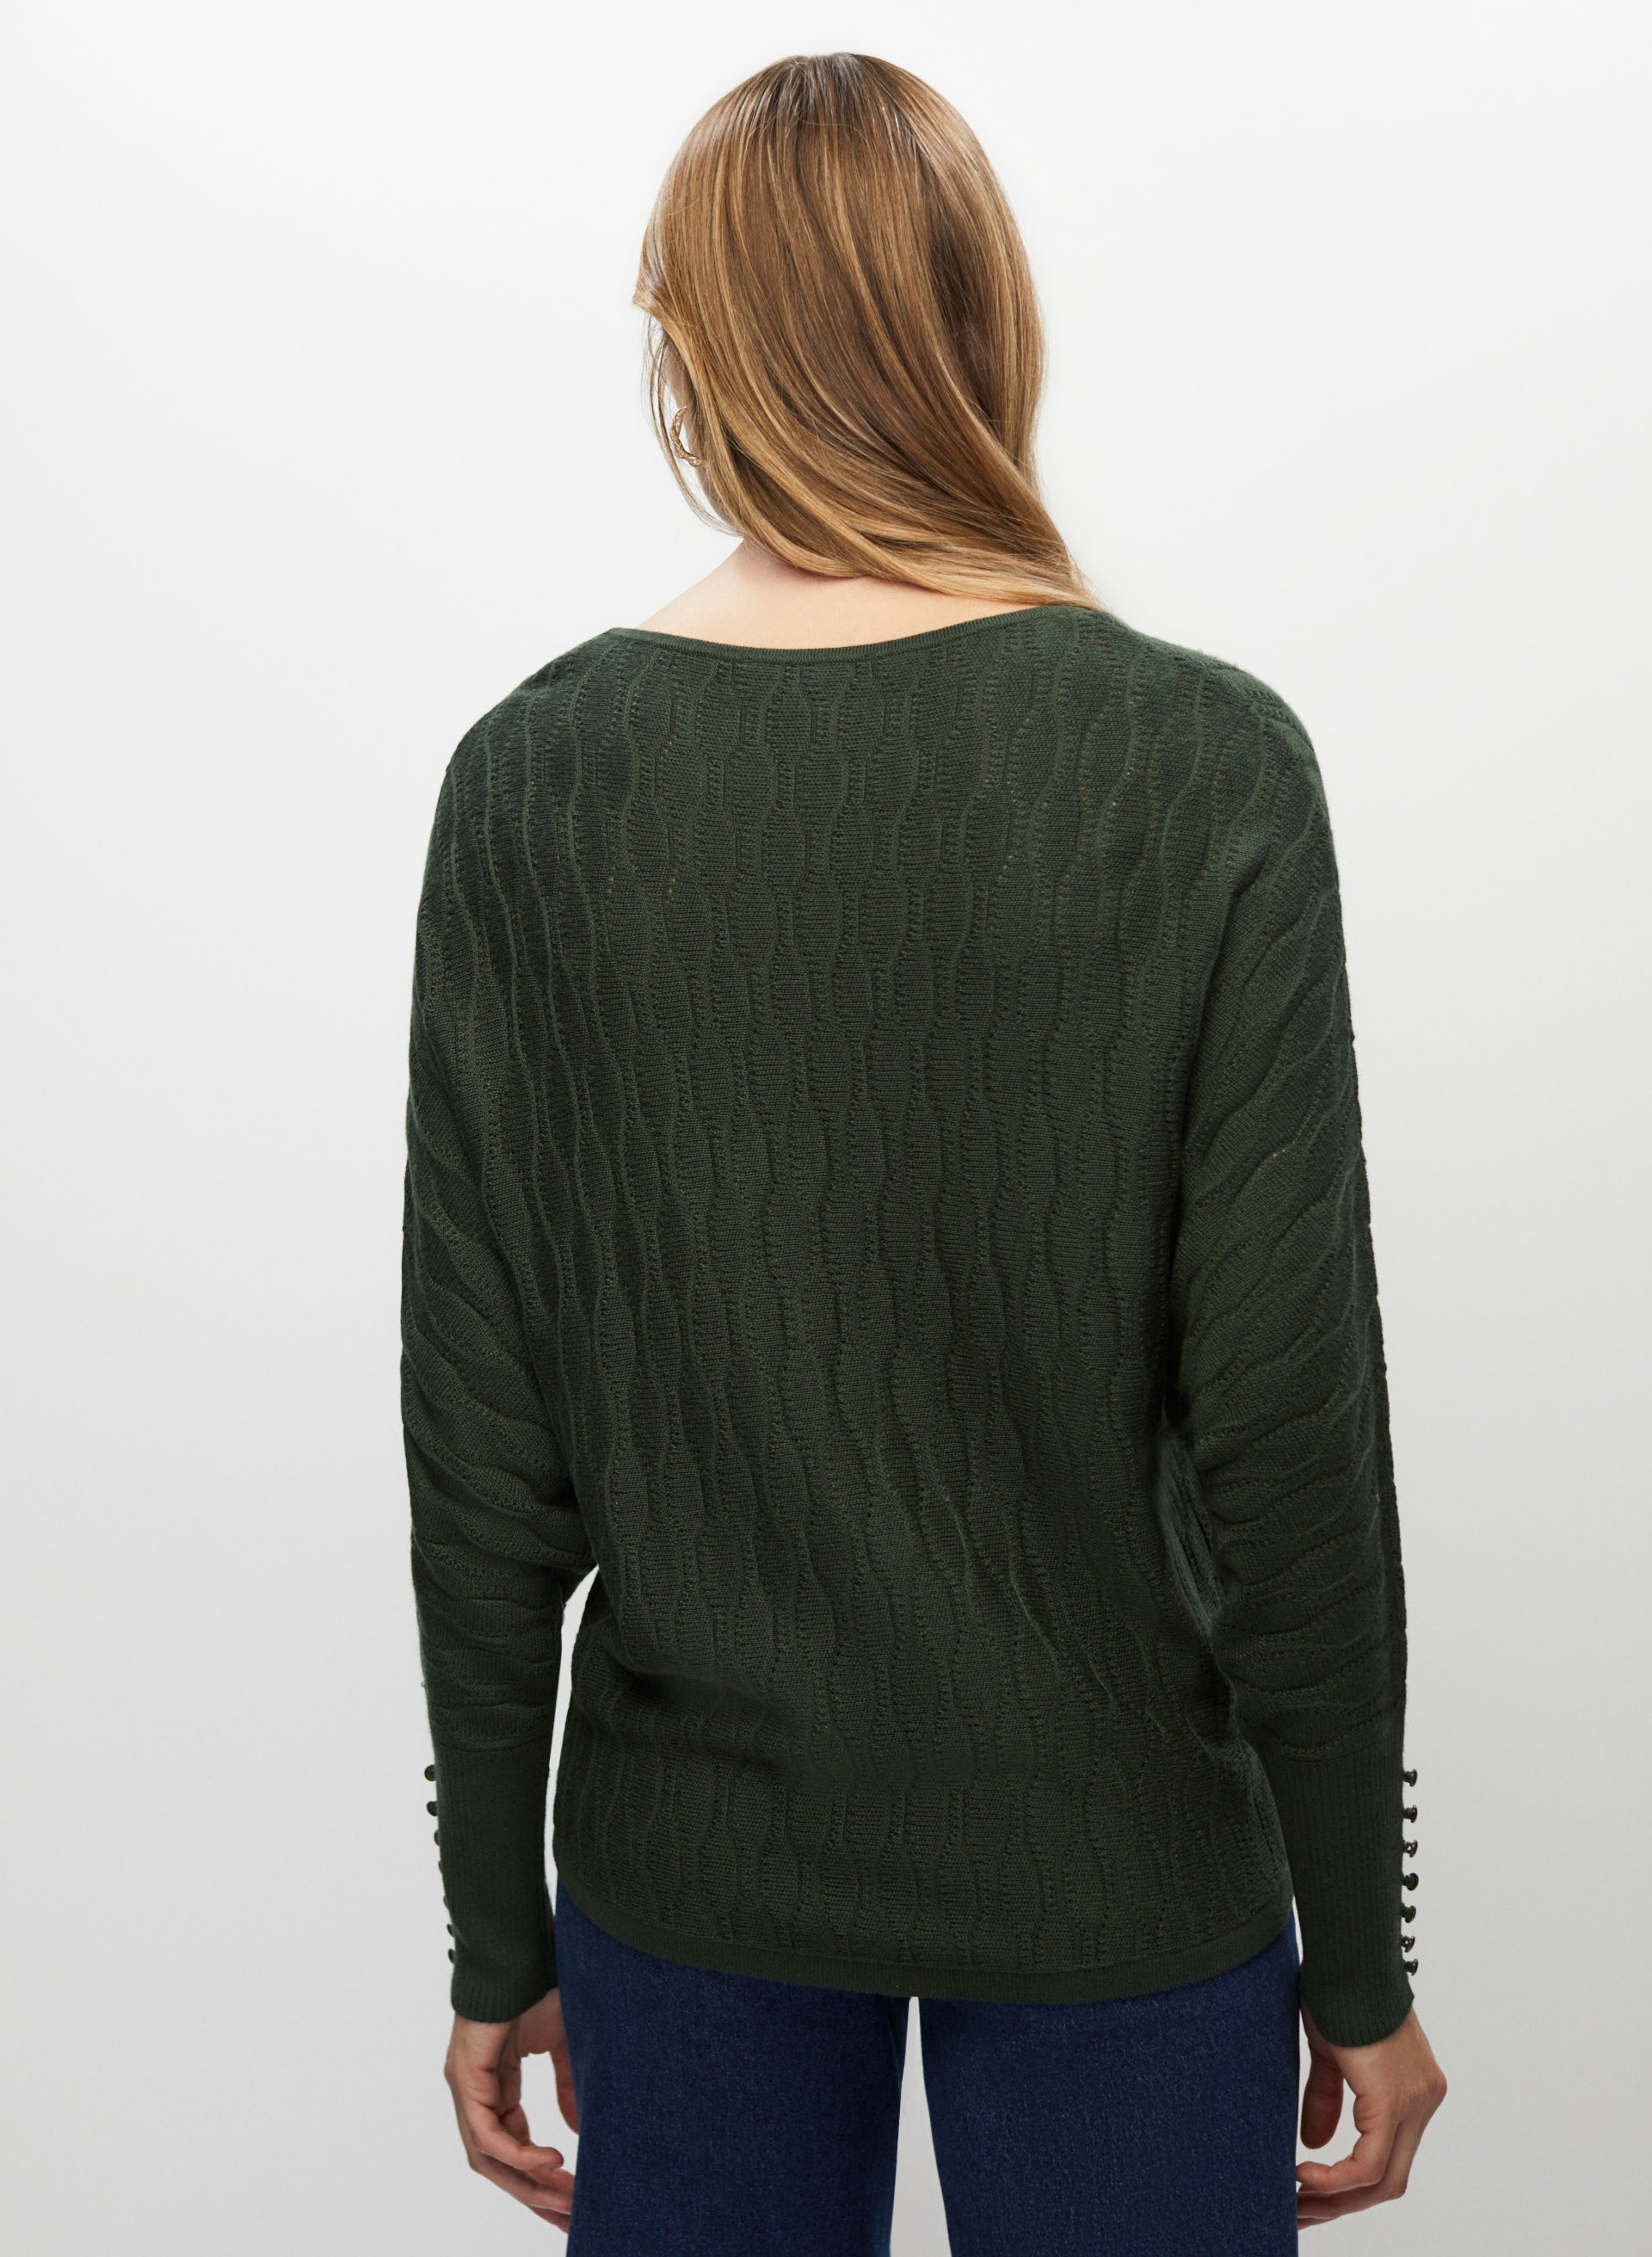 Boat Neck Stitched Sweater